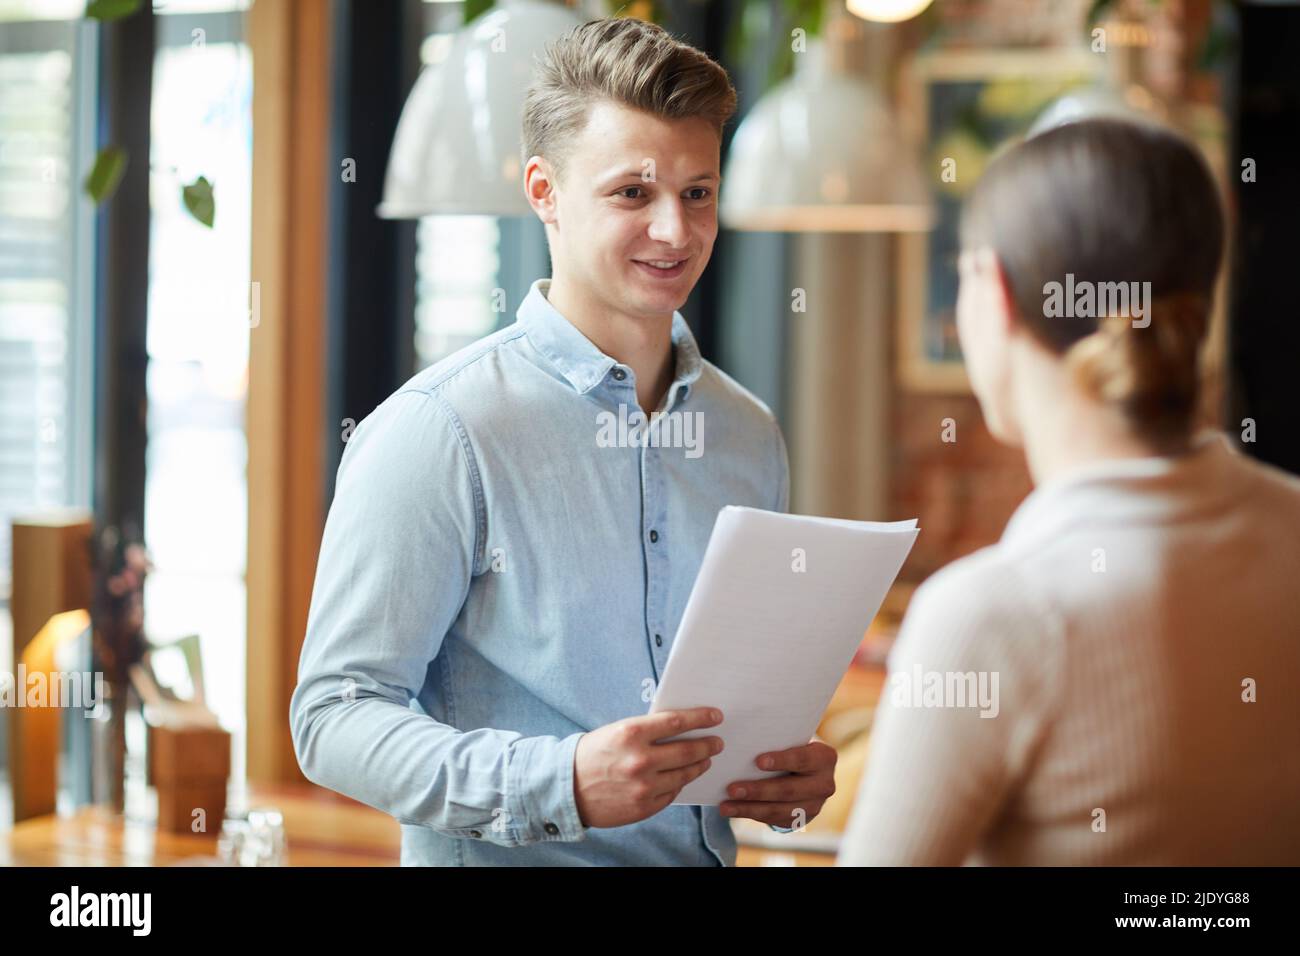 Content young male restaurant manager with papers standing in cafe and talking to waitress about customer service Stock Photo